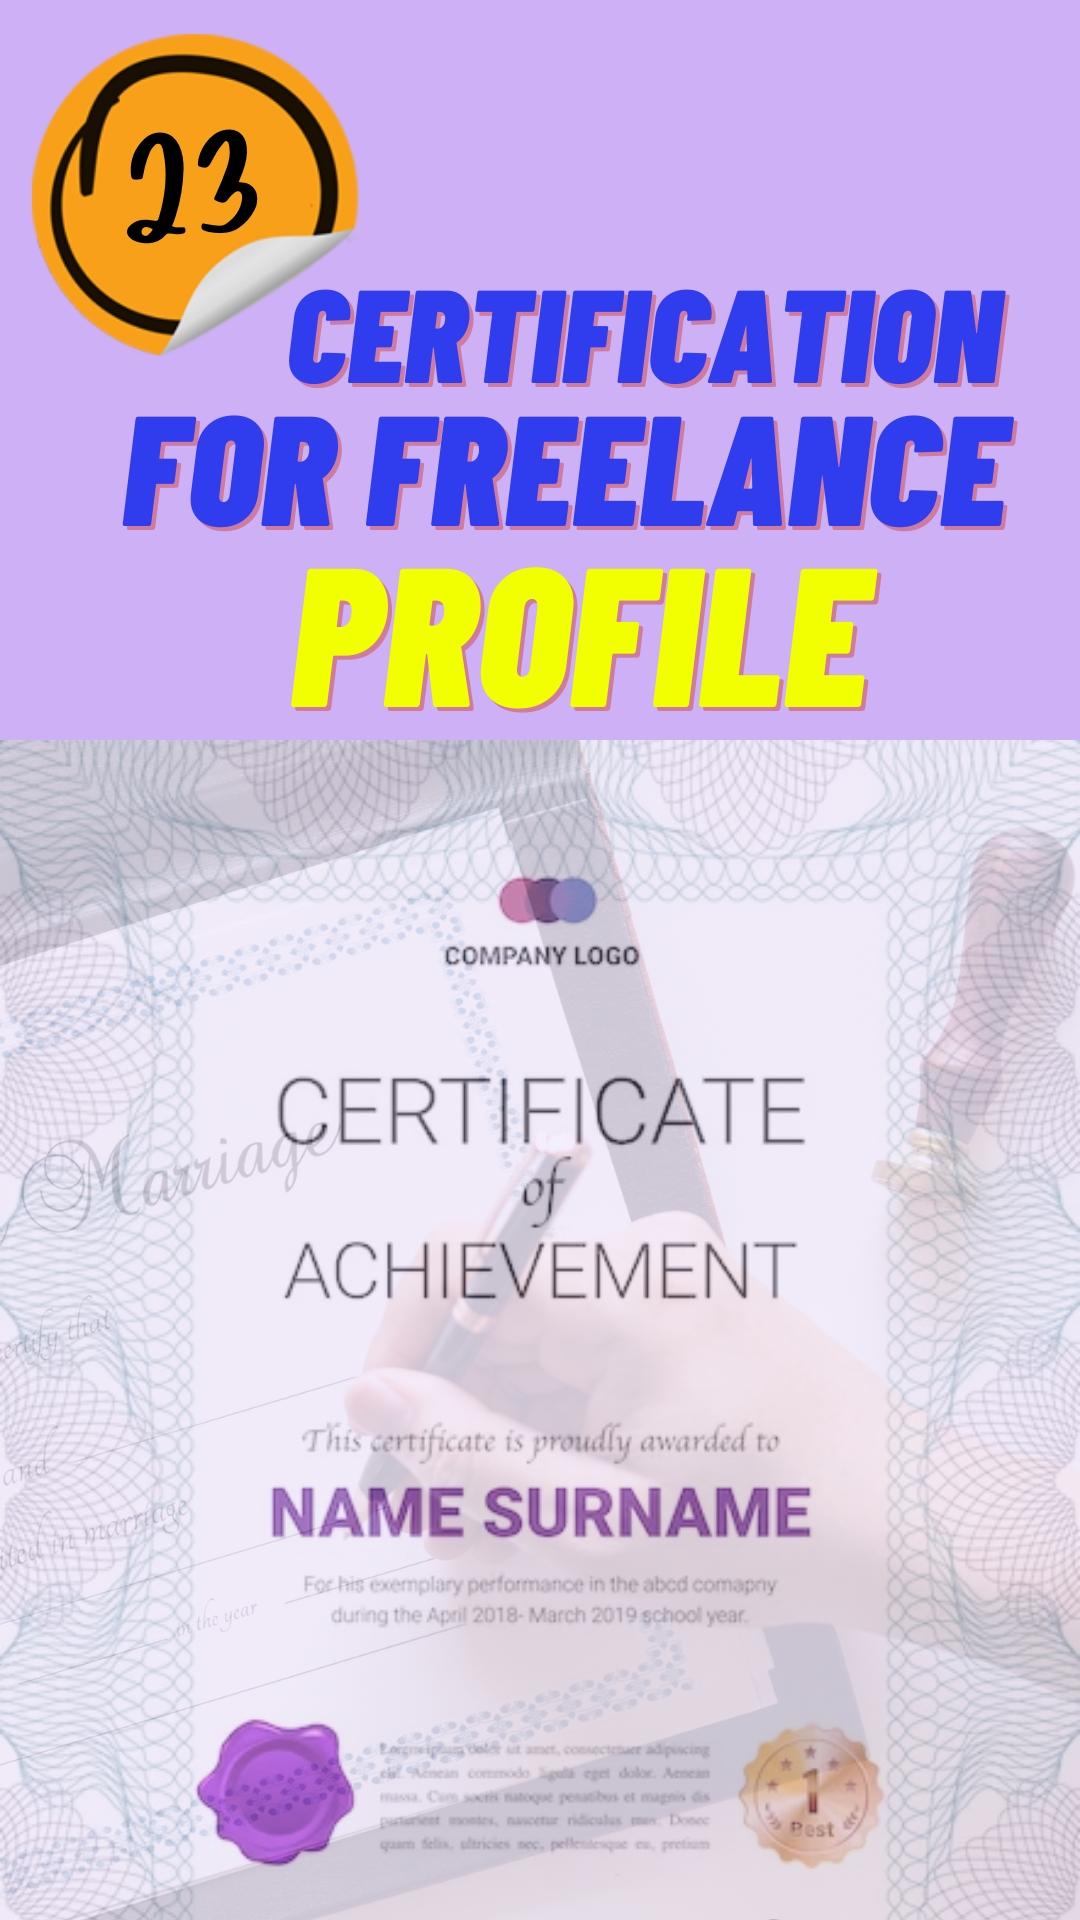 Certification for Freelance Profile